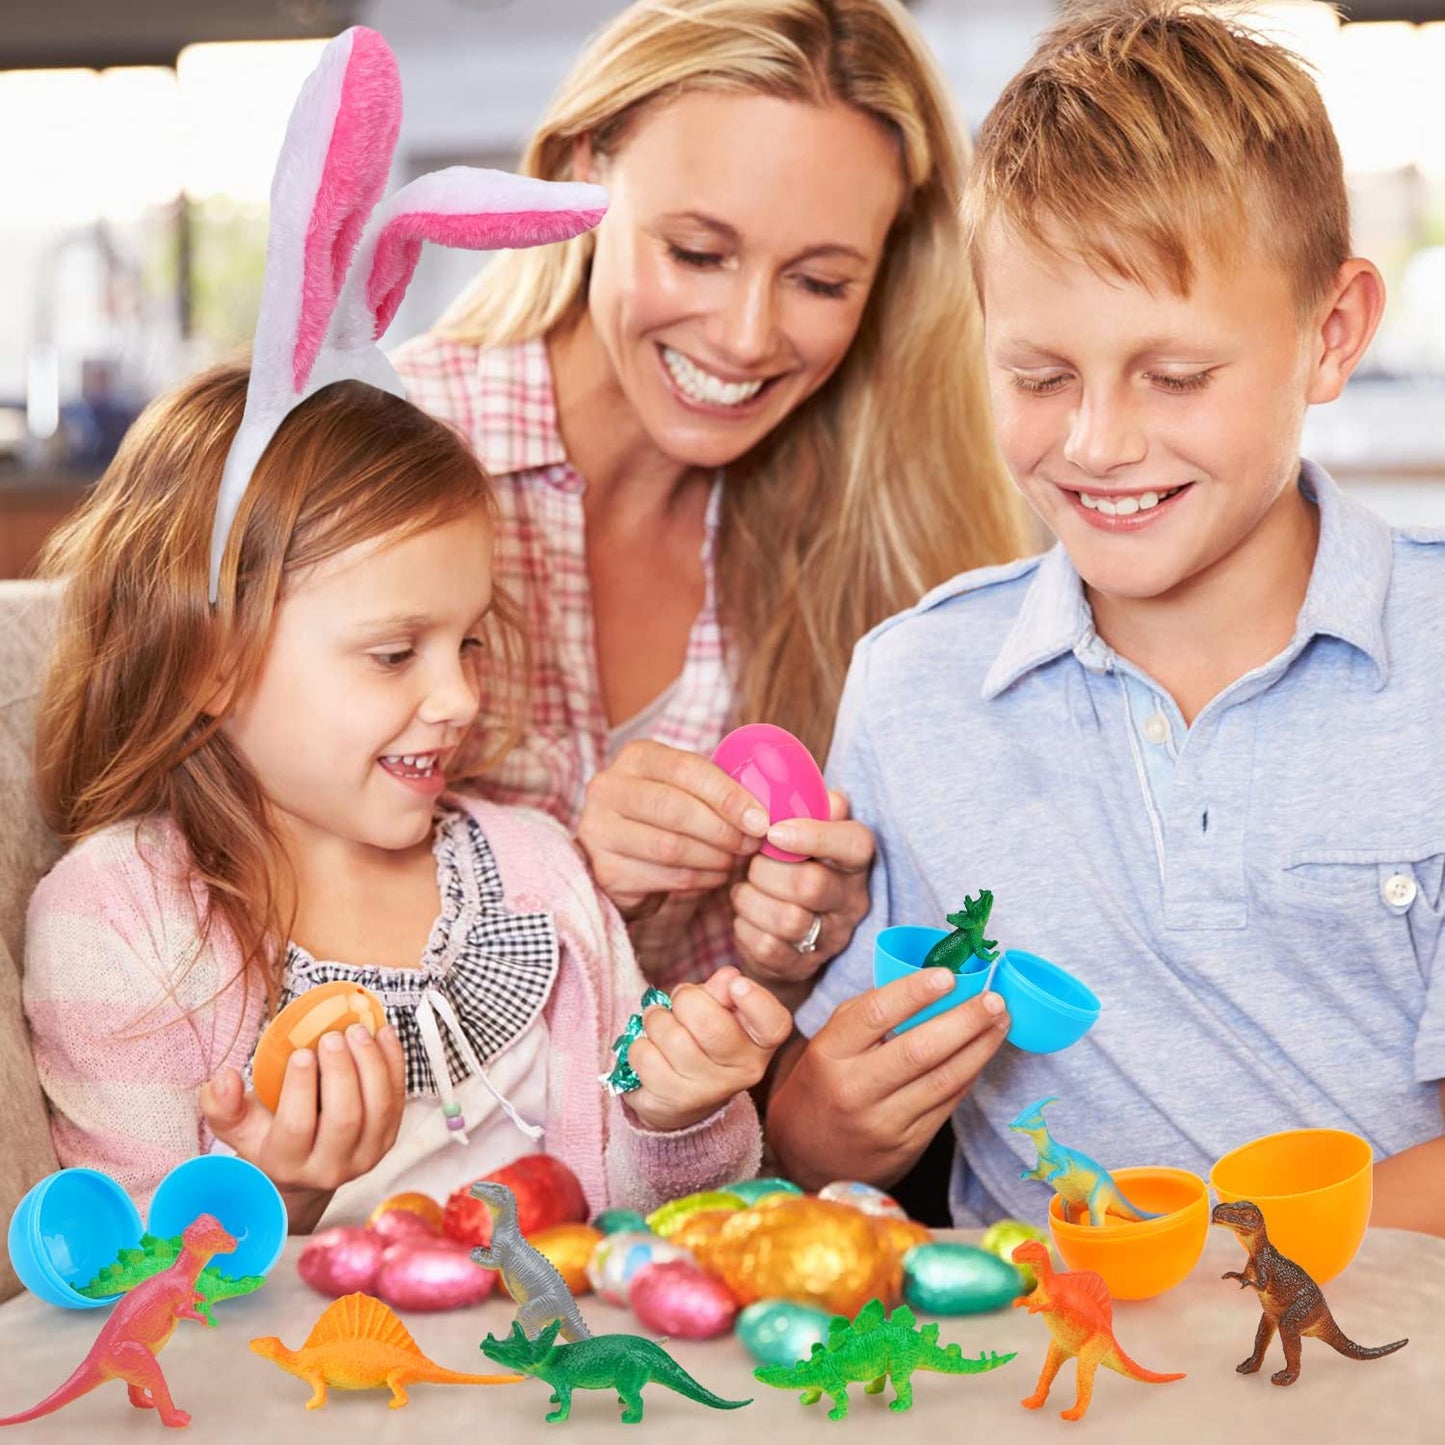 Easter Eggs Filled With Pullback Construction Vehicles, Cute Animals, Dinosaurs, Jewelry pieces and Bunnies